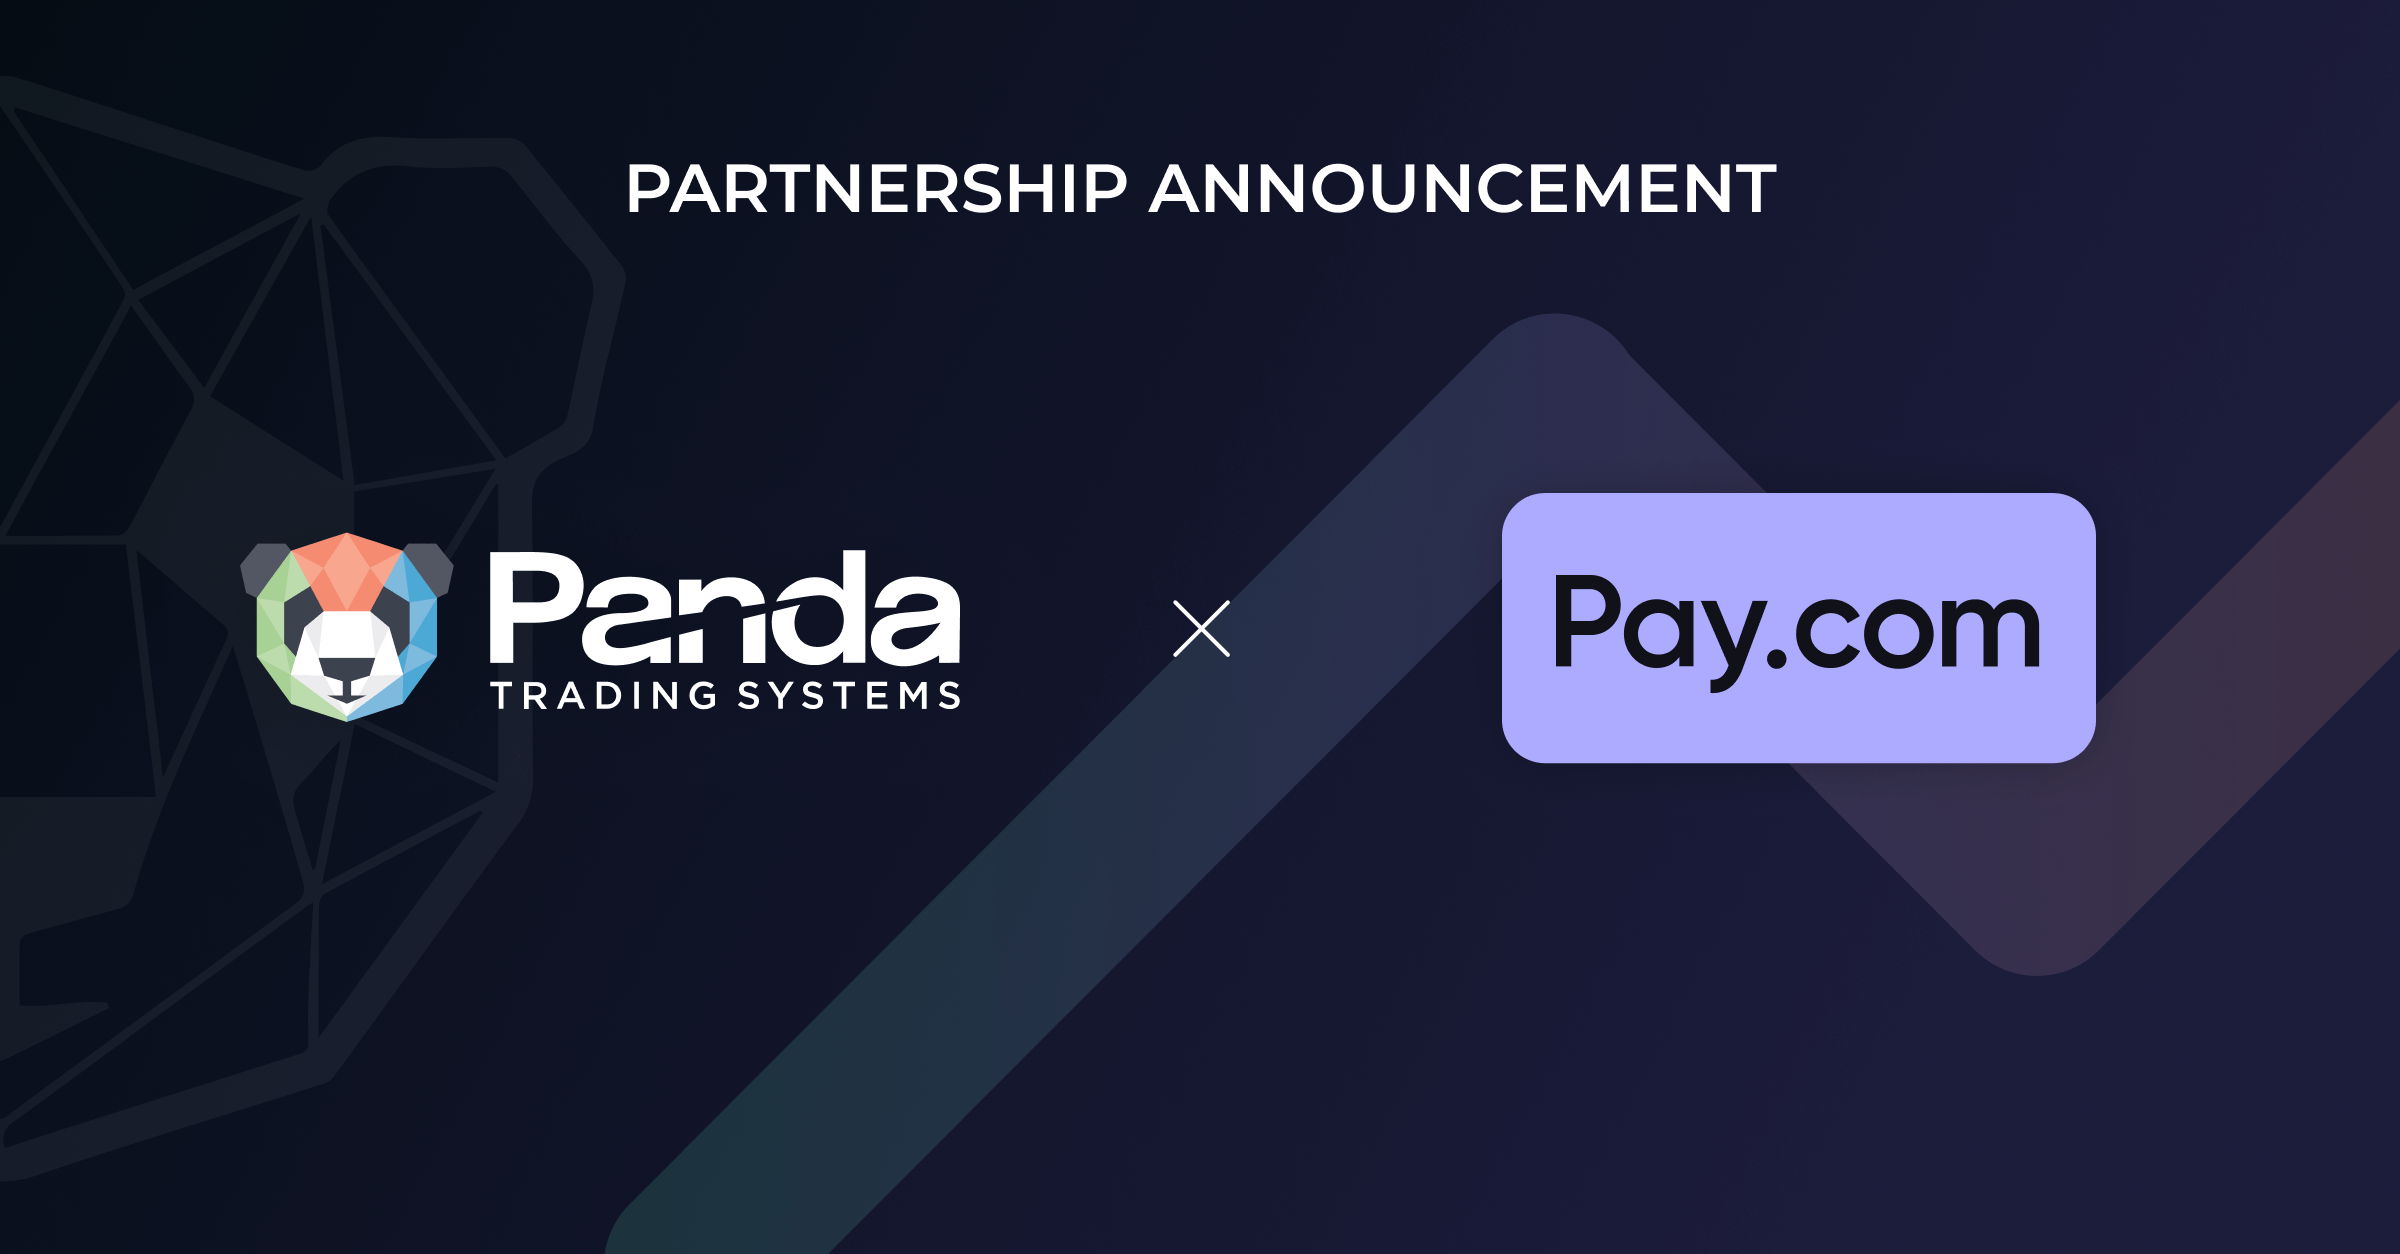 Panda Trading Systems and Pay.com: Revolutionizing Online Trading with Strategic Partnership